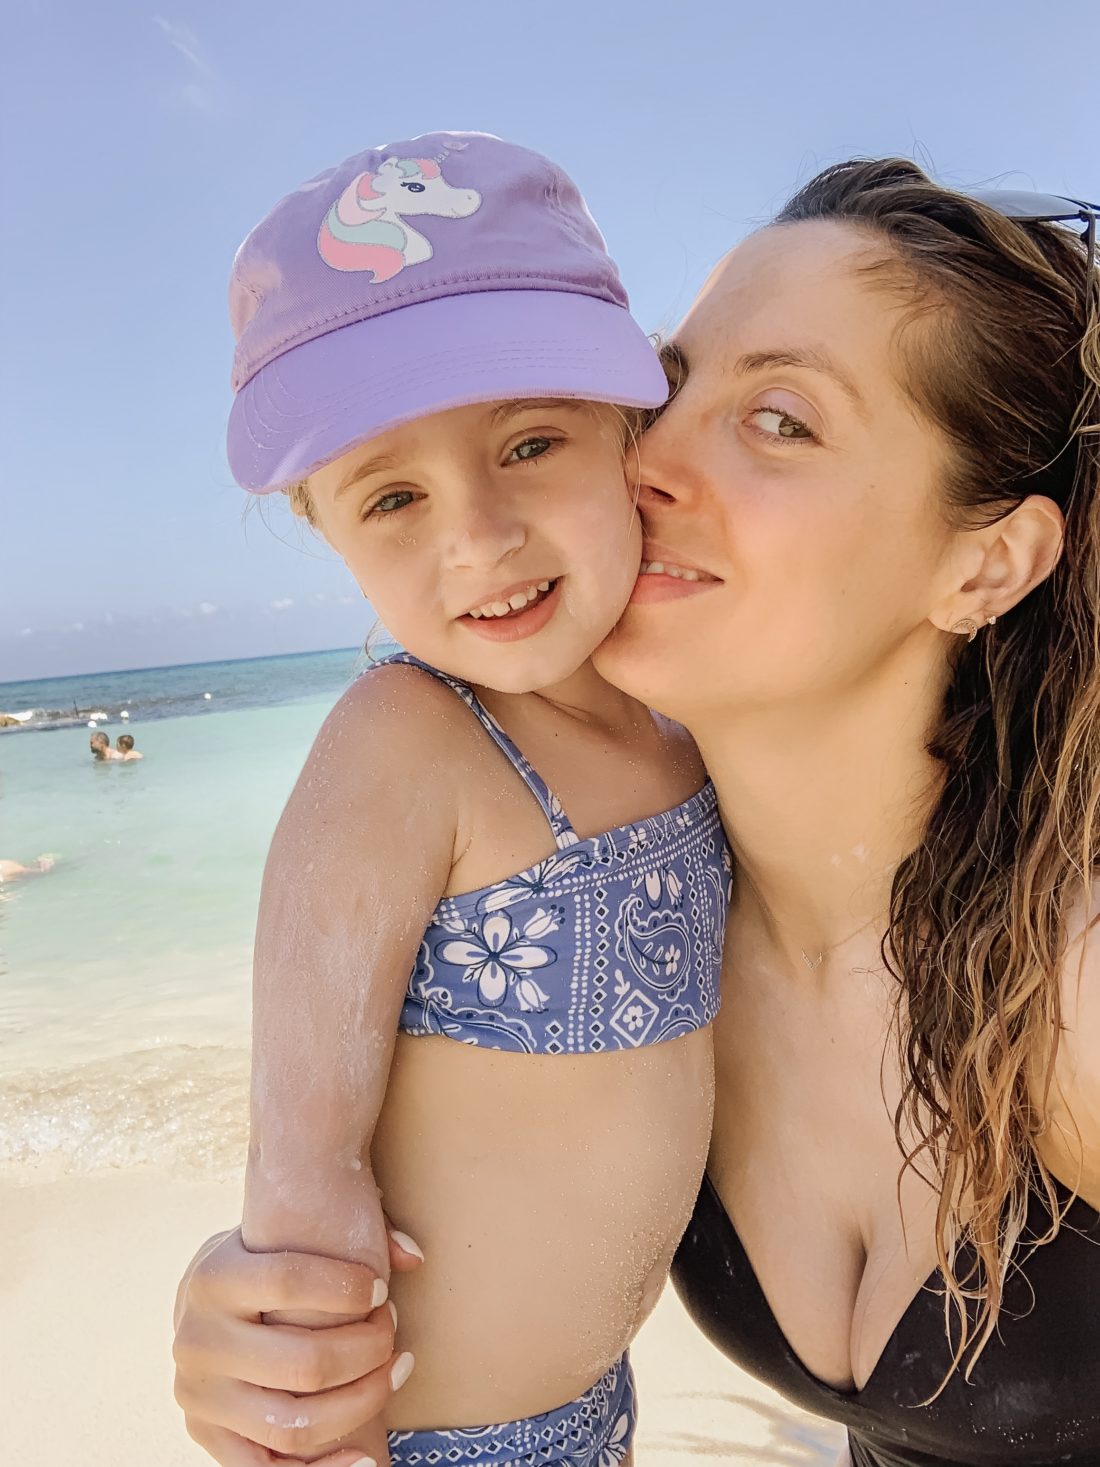 Eva Amurri Martino of Happily Eva After poses with daughter Marlowe on their family trip to Jamaica